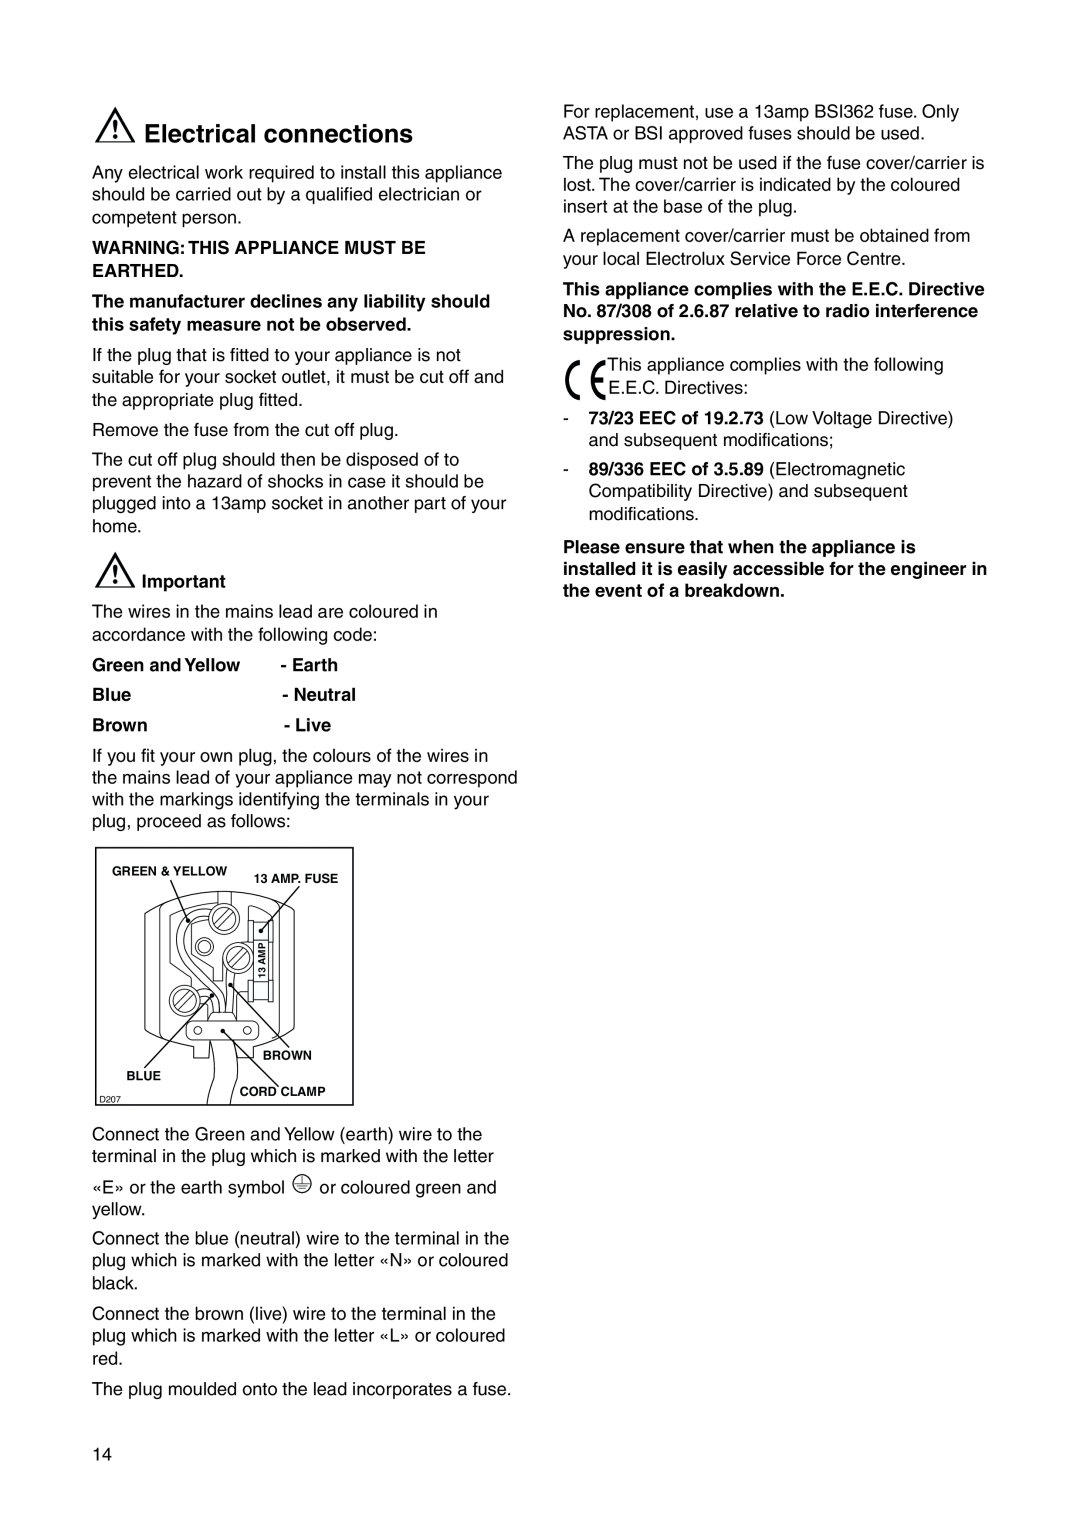 Electrolux ERU 13400 manual Electrical connections, Warning This Appliance Must Be Earthed, Green and Yellow 